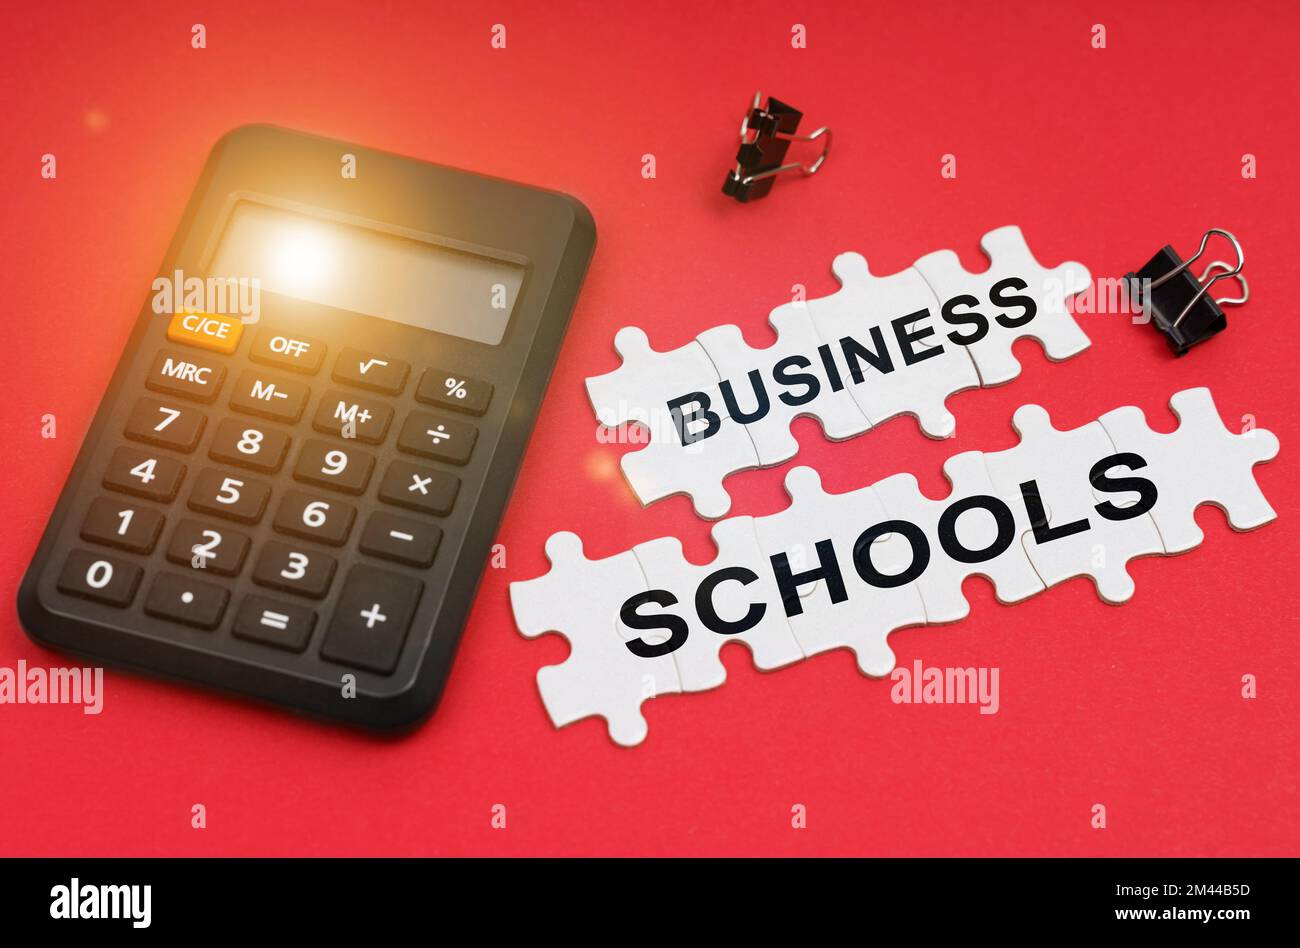 Finance and economy concept. On the red surface are a calculator, clamps and puzzles with the inscription - Business Schools Stock Photo